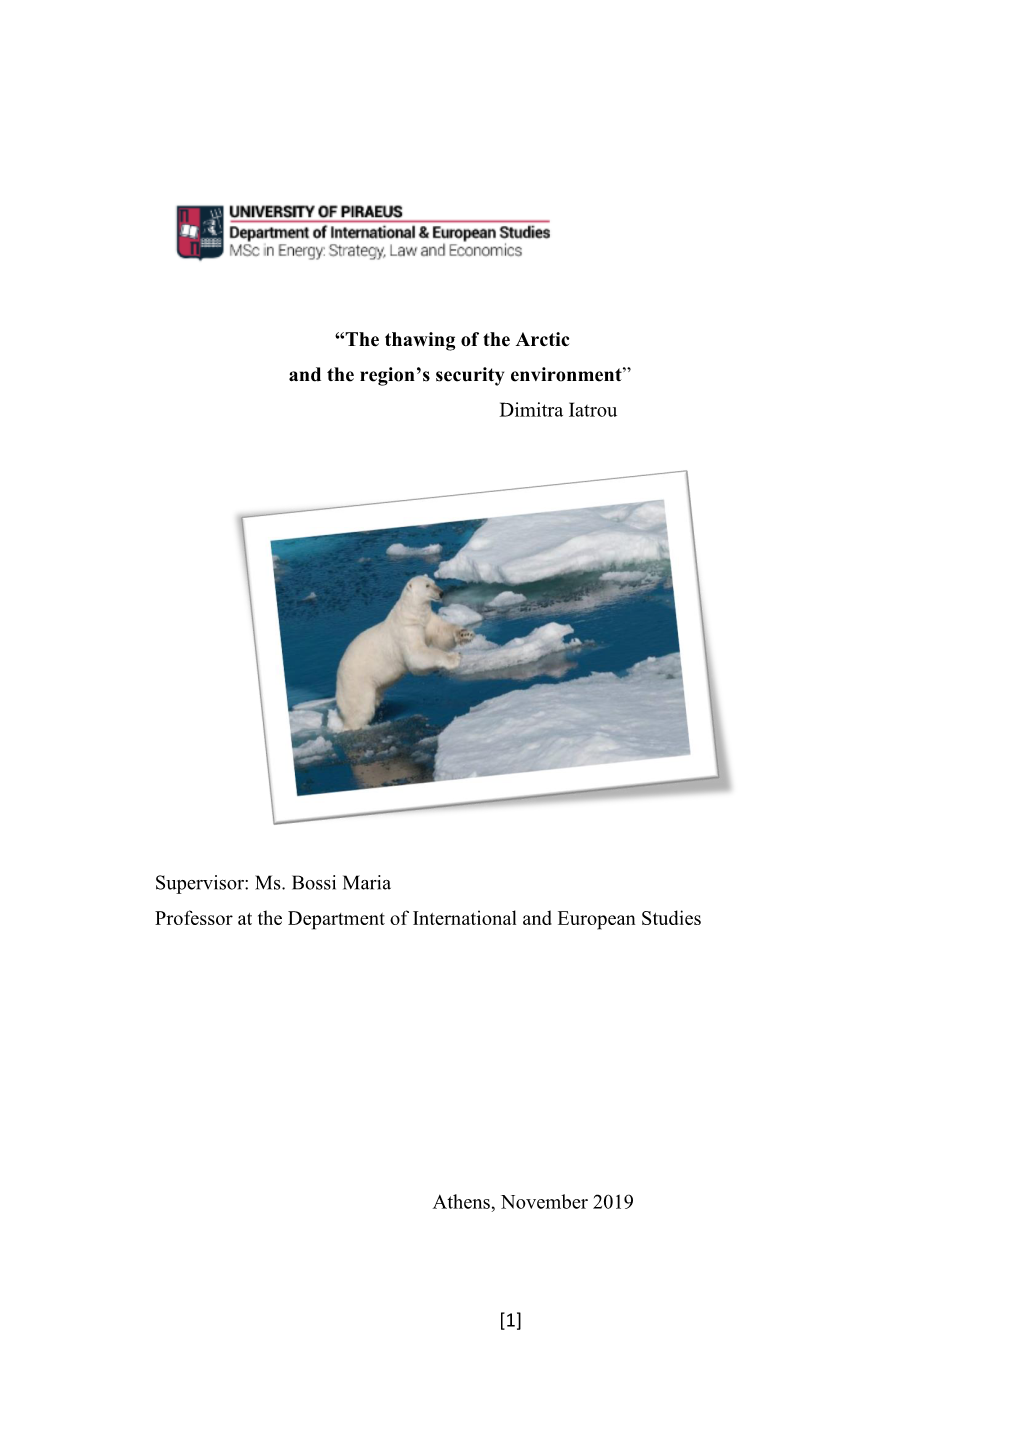 [1] “The Thawing of the Arctic and the Region's Security Environment”